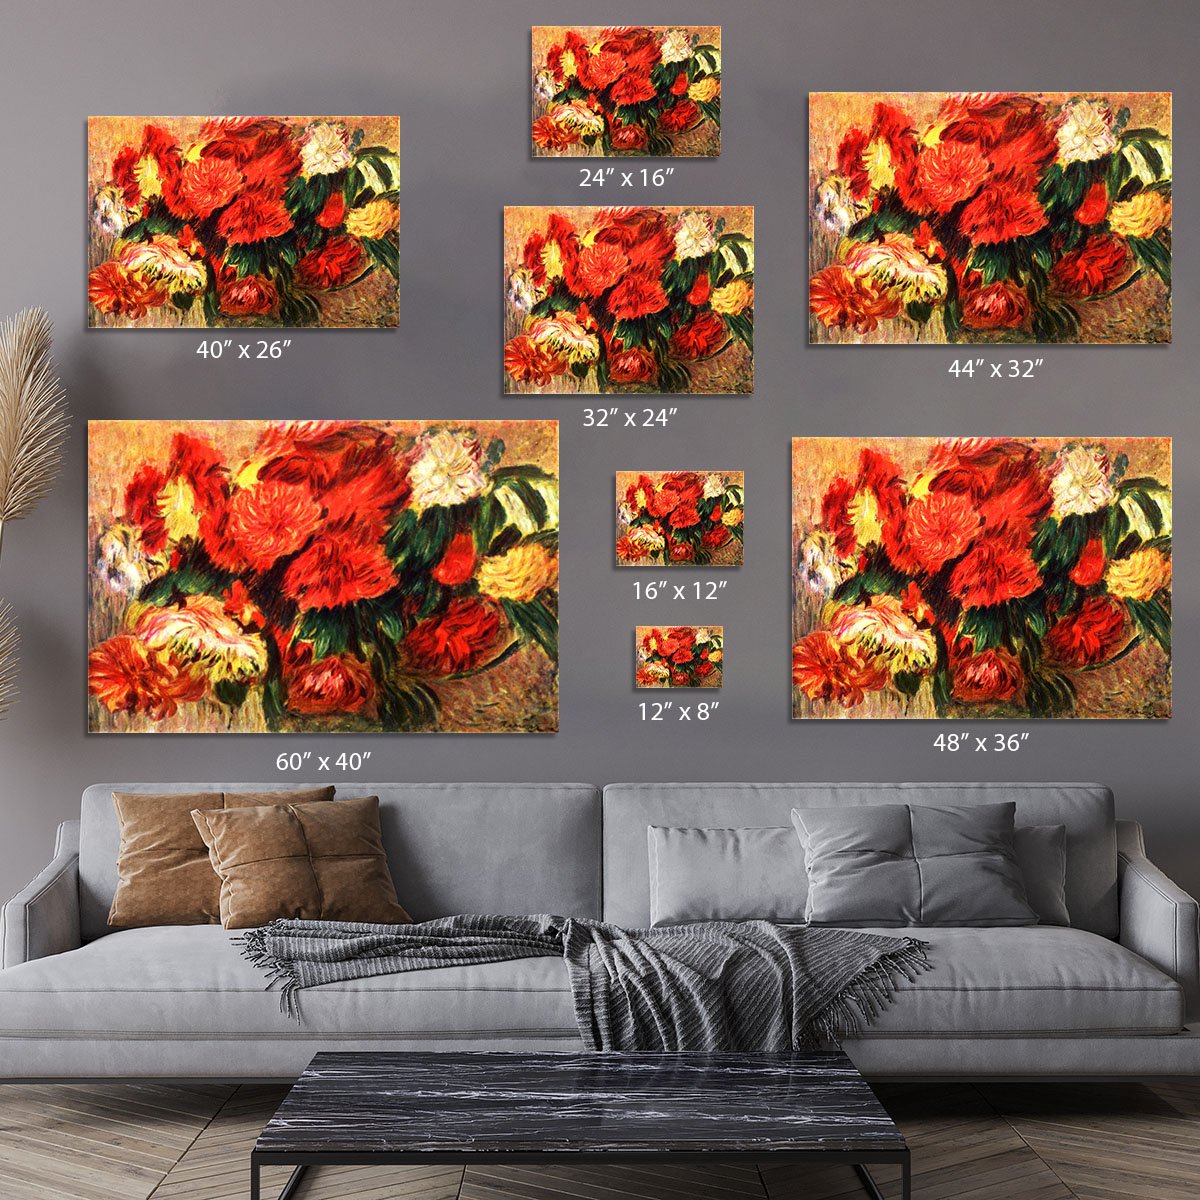 Still life with Chrysanthemums by Renoir Canvas Print or Poster